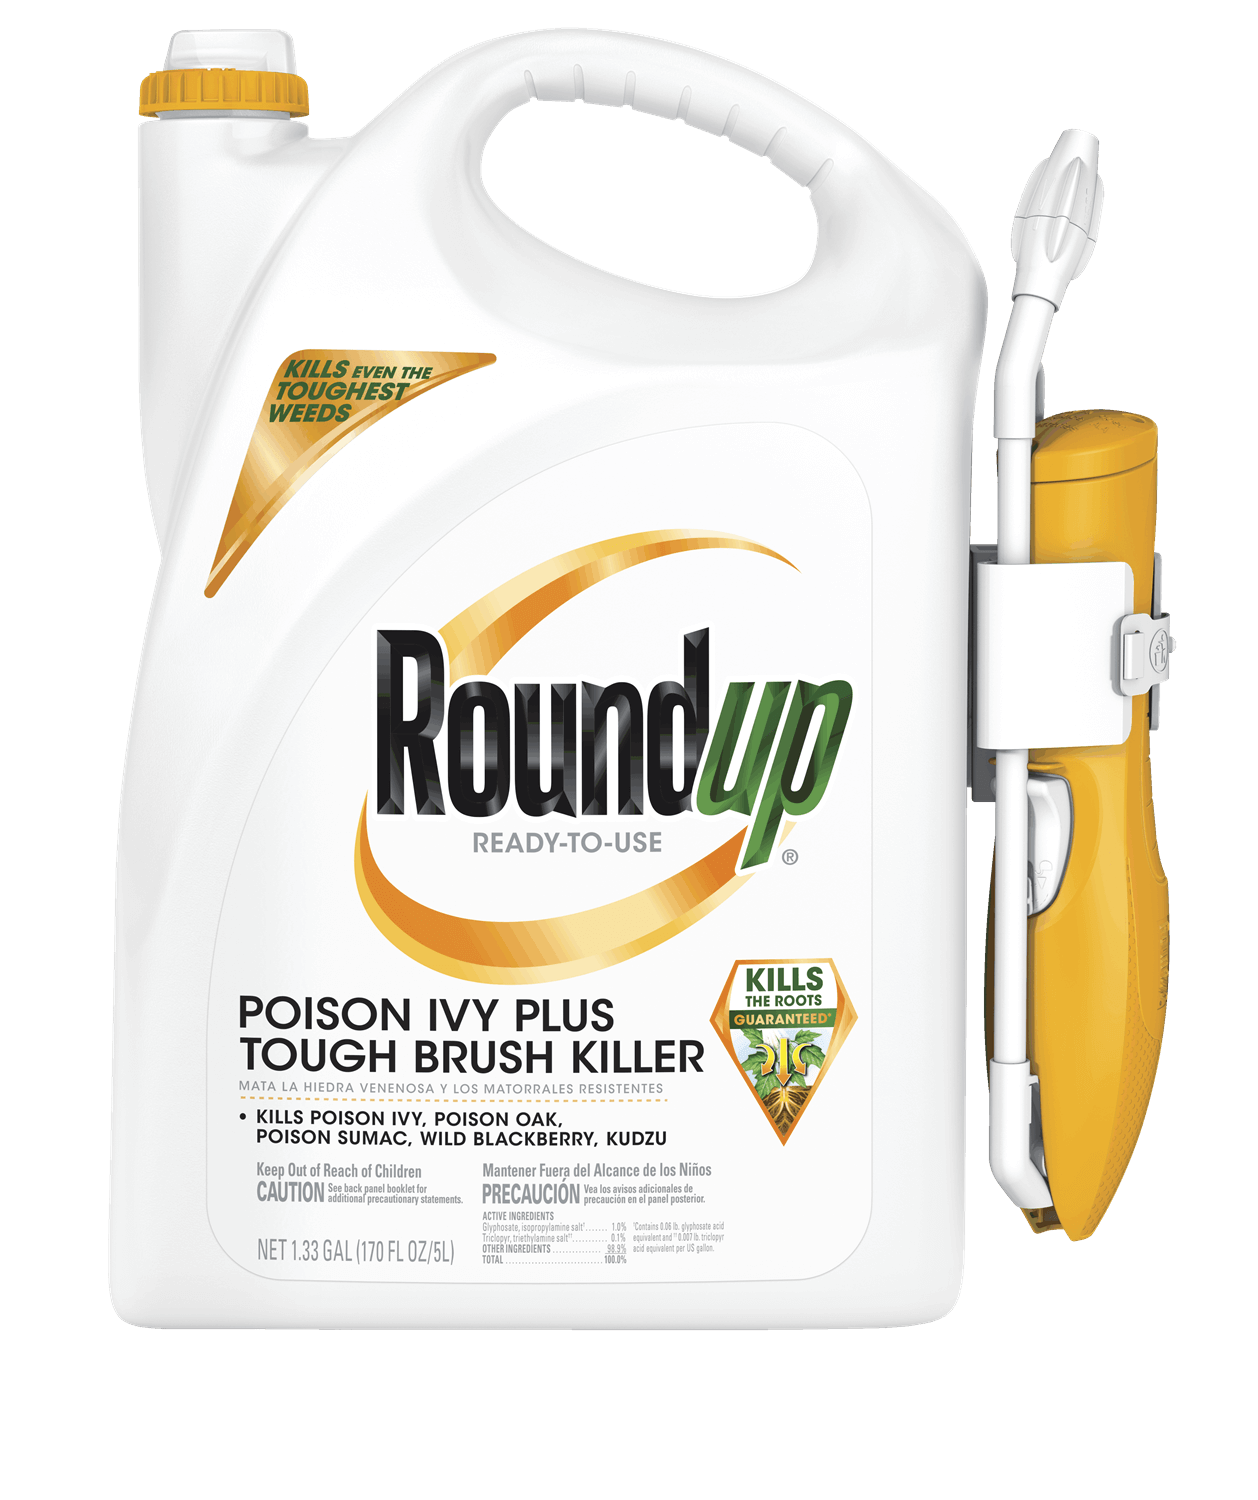 Roundup, Roundup® Ready-To-Use Poison Ivy Plus Tough Brush Killer with Comfort Wand®